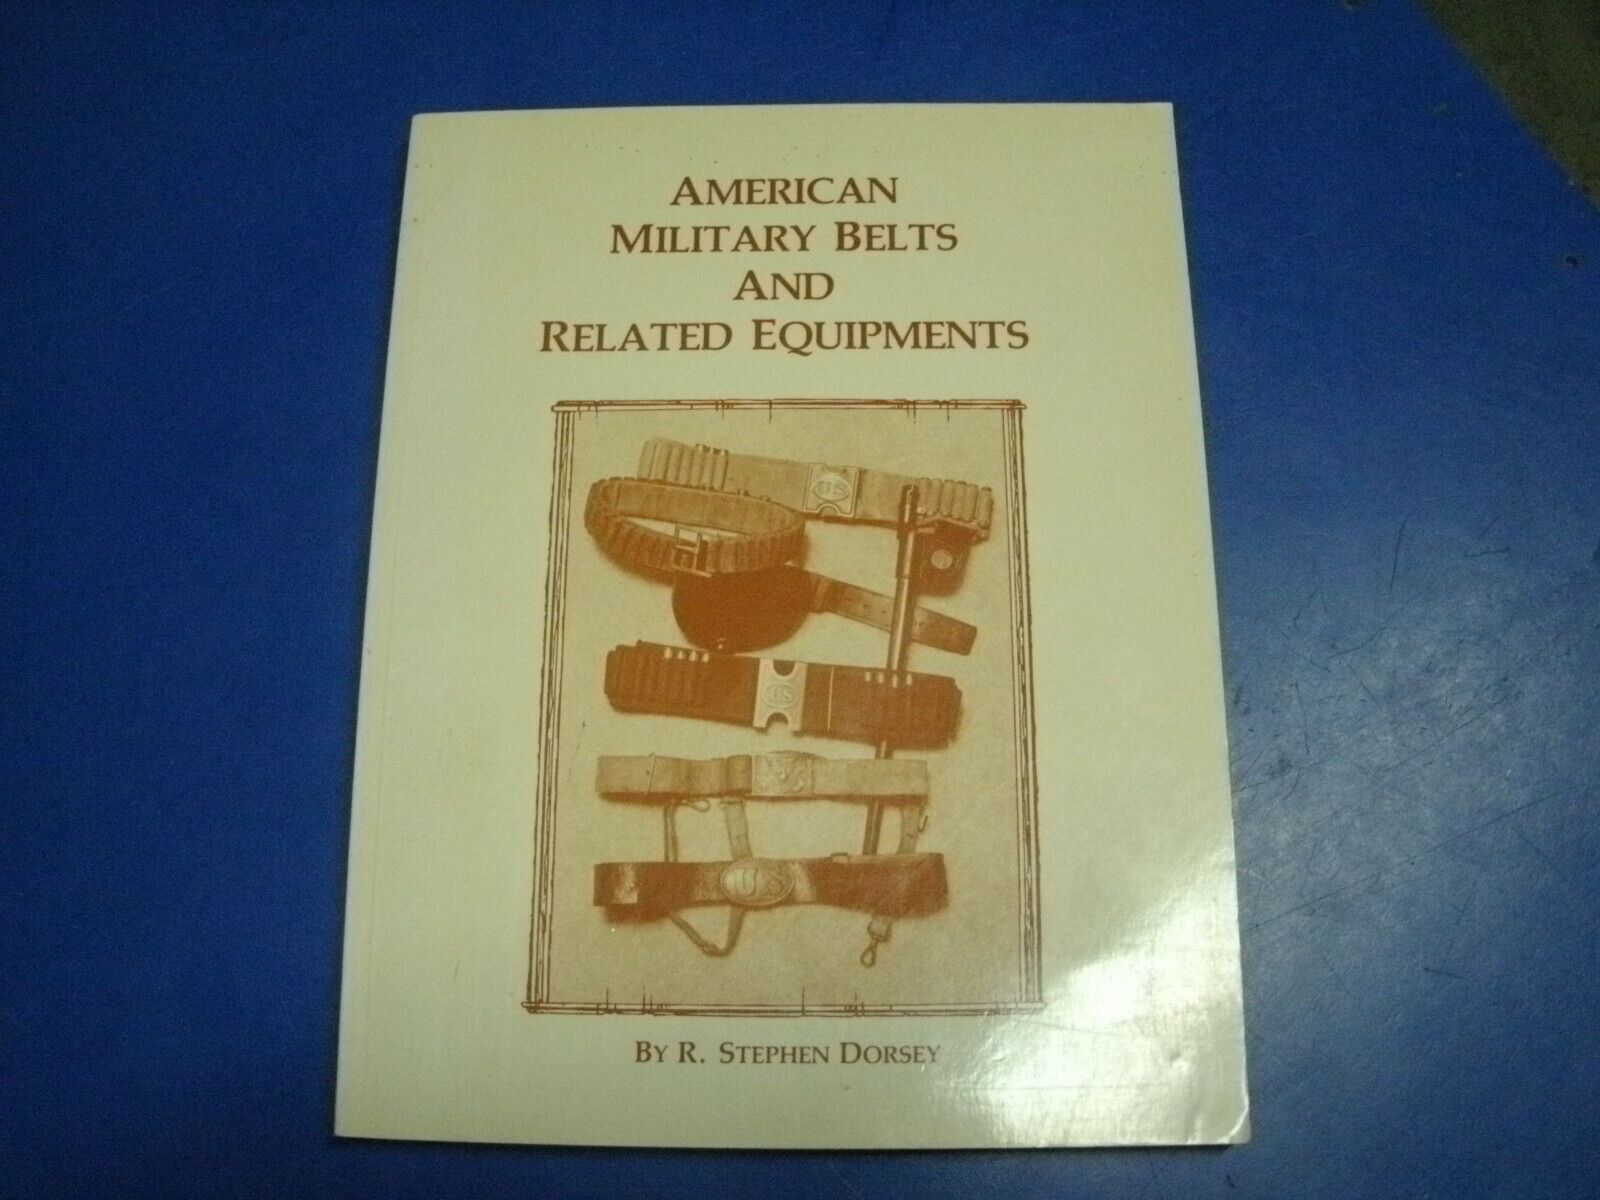 American Military Belts and Related Equipments, Dorsey, 1984